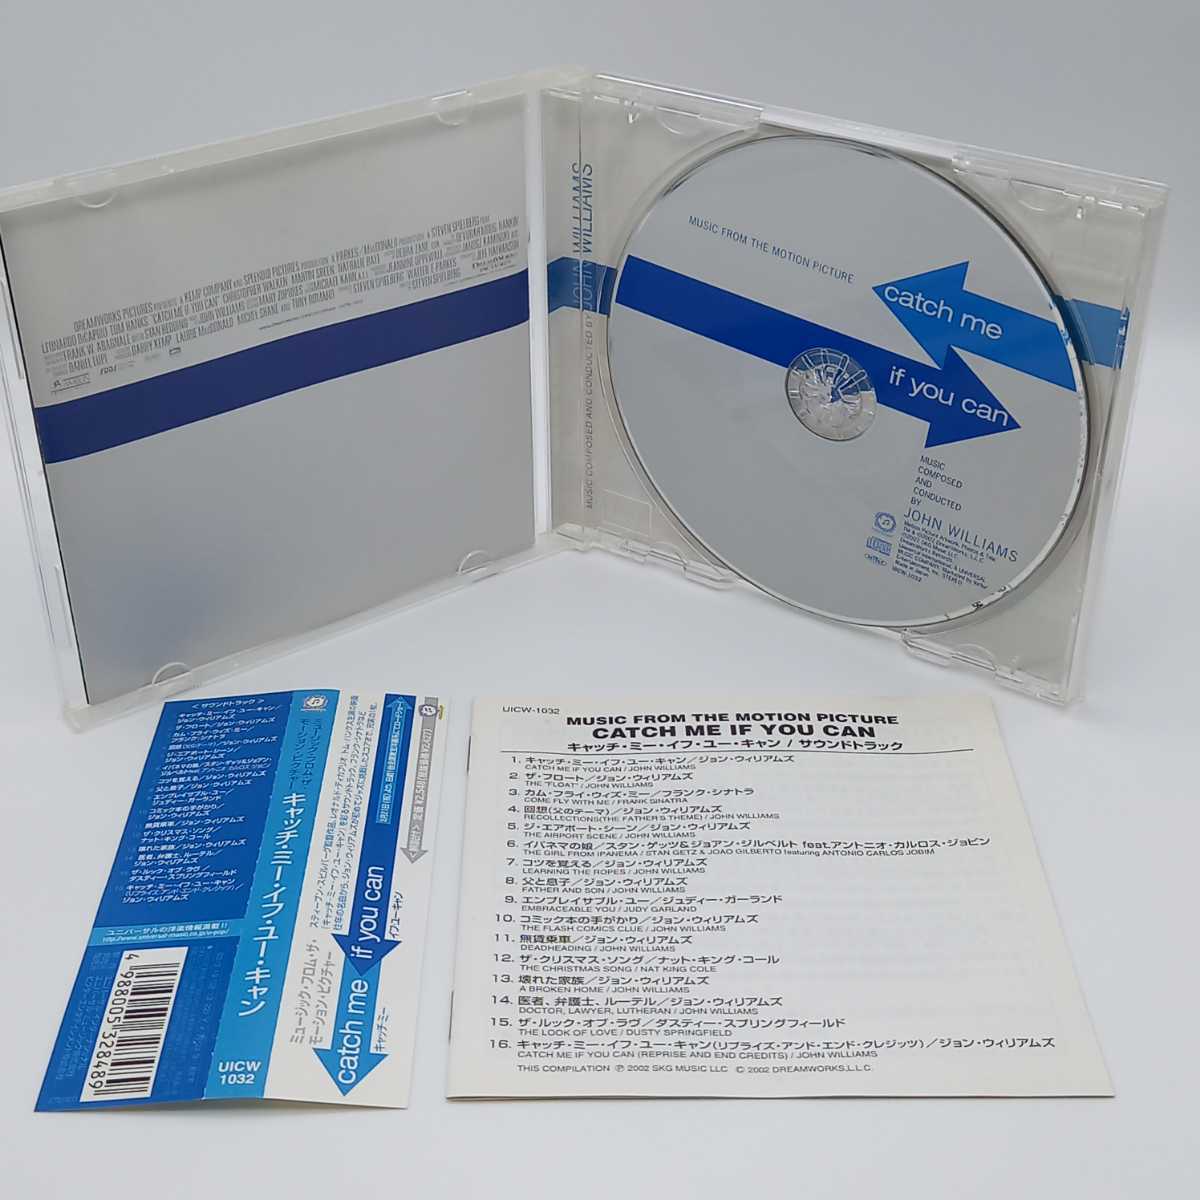 C-0629★中古CD 帯付★キャッチ・ミー・イフ・ユー・キャン OST サントラ CATCH ME IF YOU CAN UICW-1032の画像3